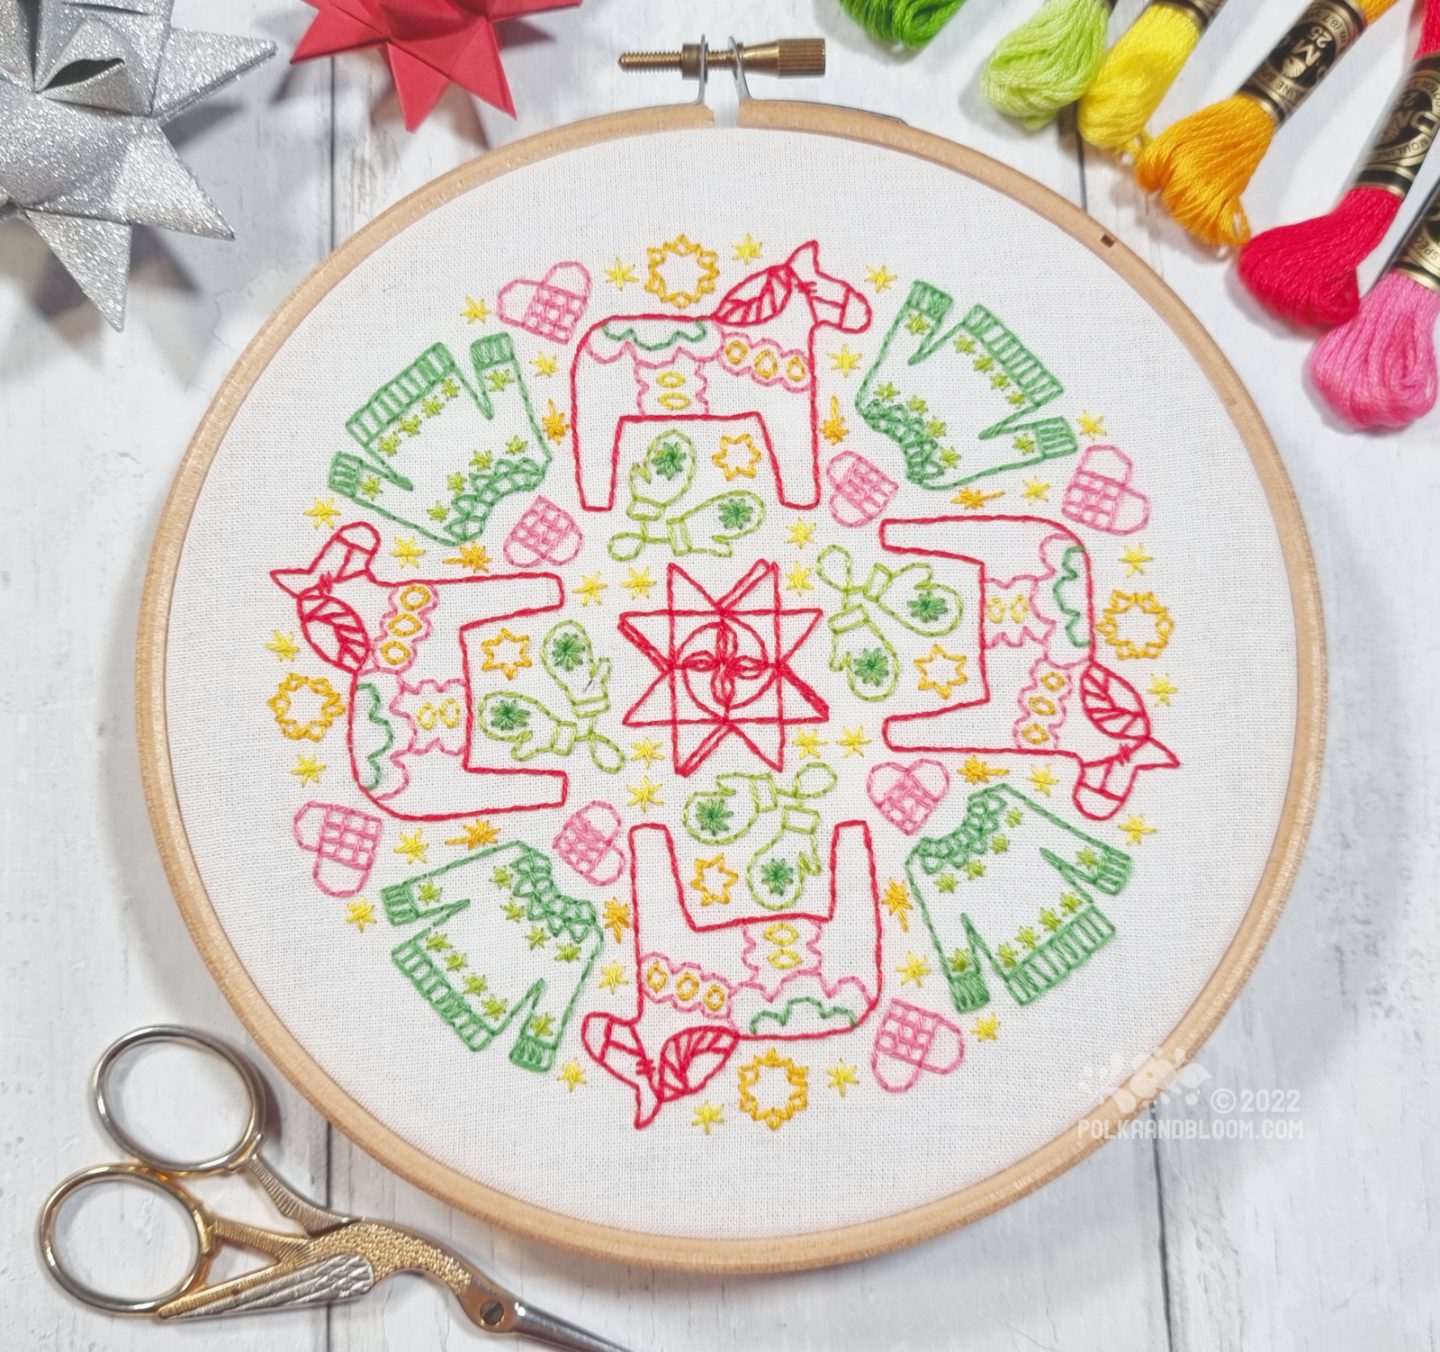 An embroidery hoop with white fabric is seen from above. On the fabric is embroidered a mandala inspired design with stars, sweaters, mittens, hears and dala horses.